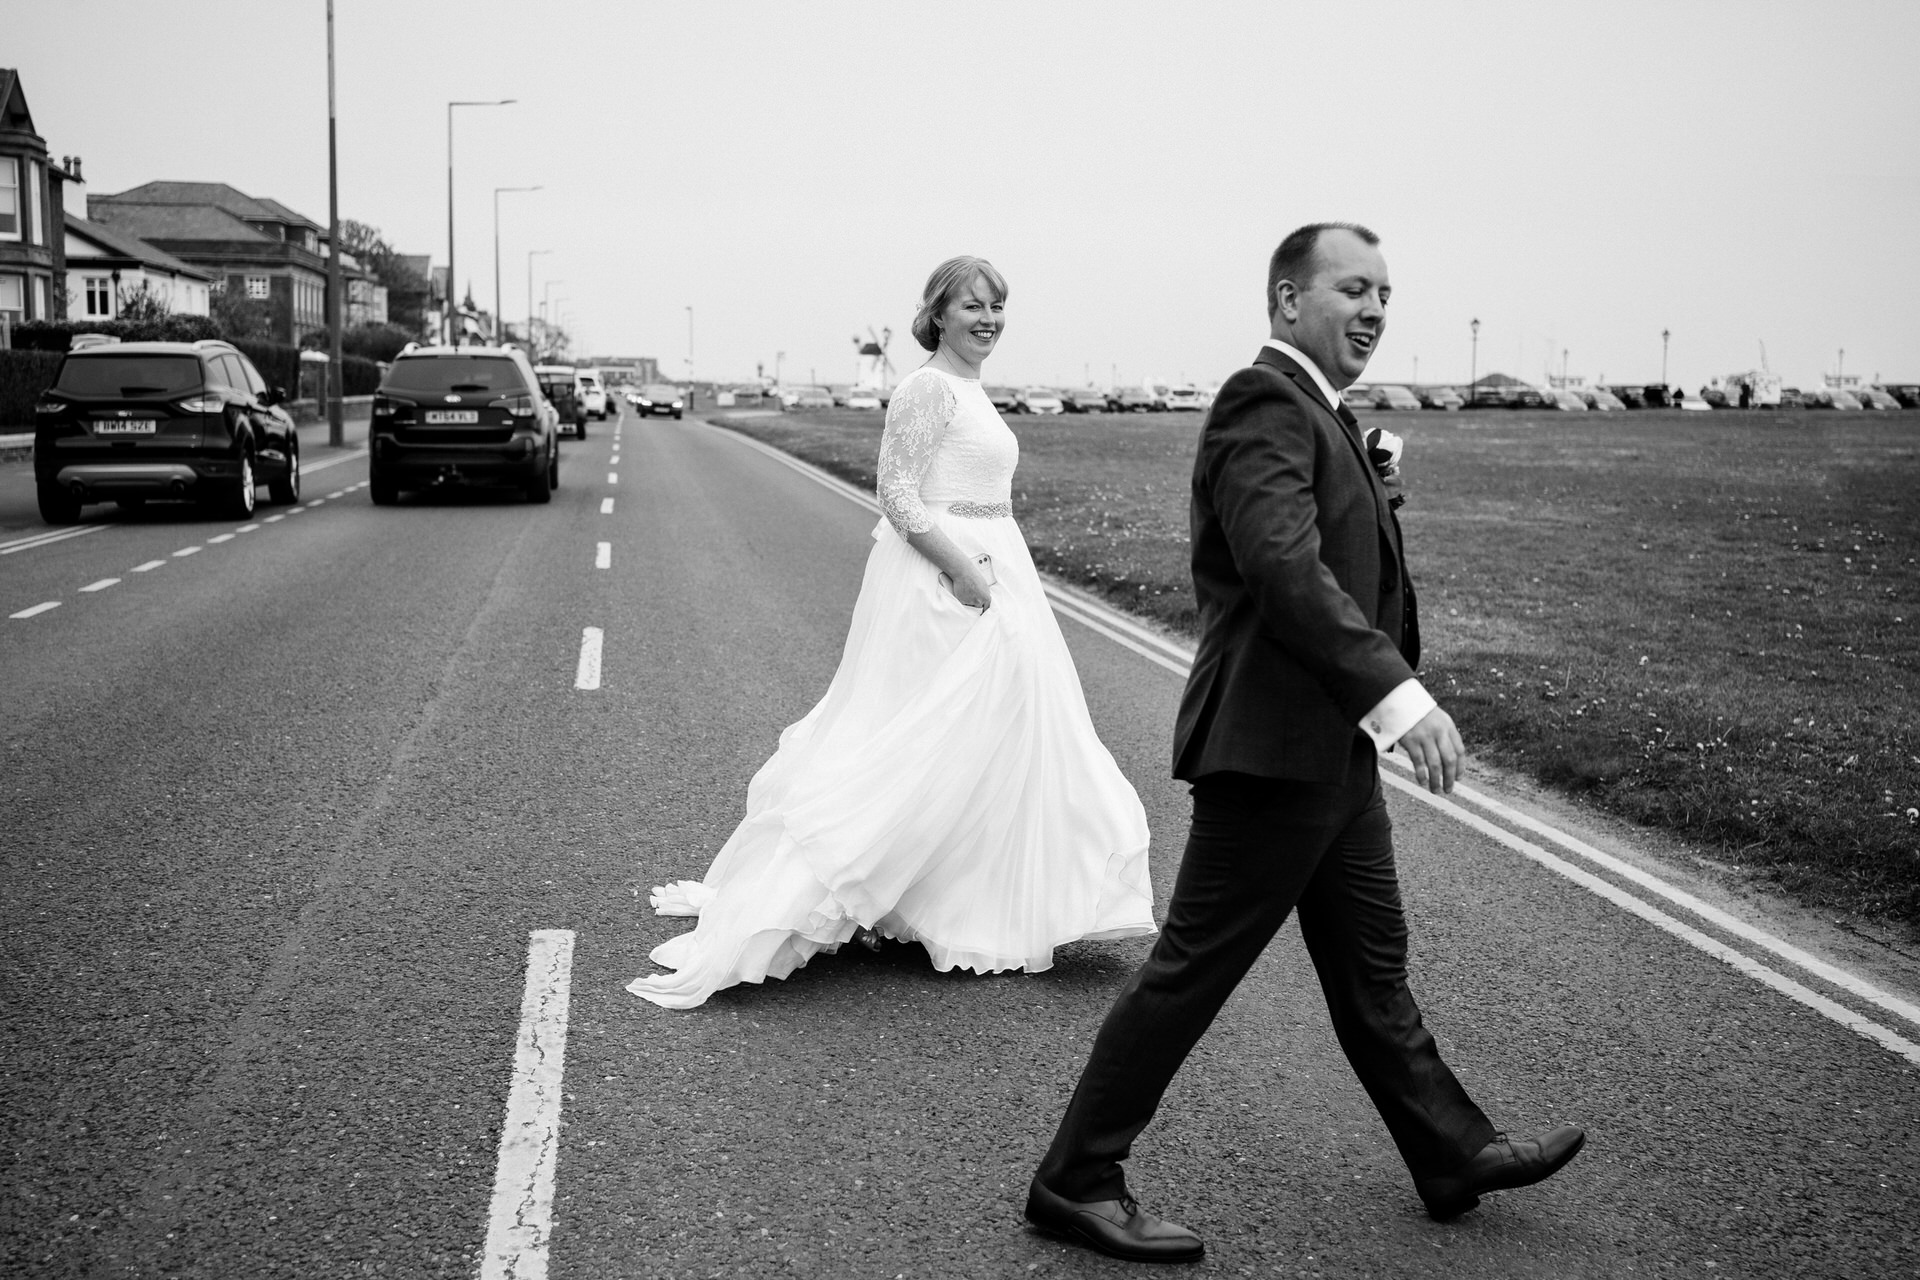 wedding reception at the Clifton arms in lytham